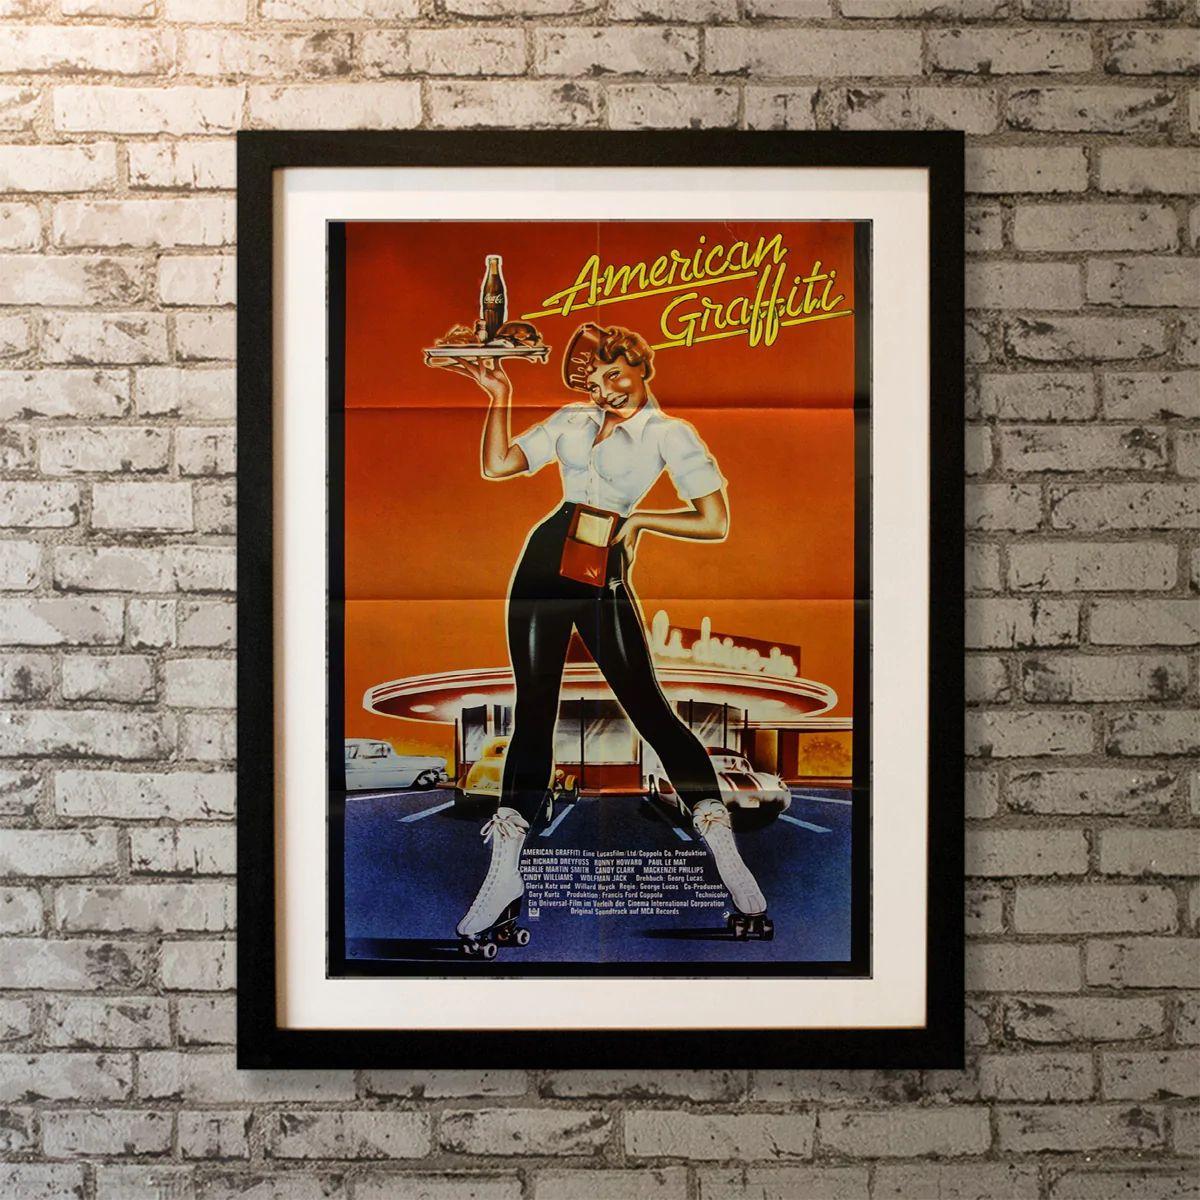 American Graffiti, Unframed Poster, 1973

A group of teenagers in California's central valley spend one final night after their 1962 high school graduation cruising the strip with their buddies before they pursue their varying goals.

Year: